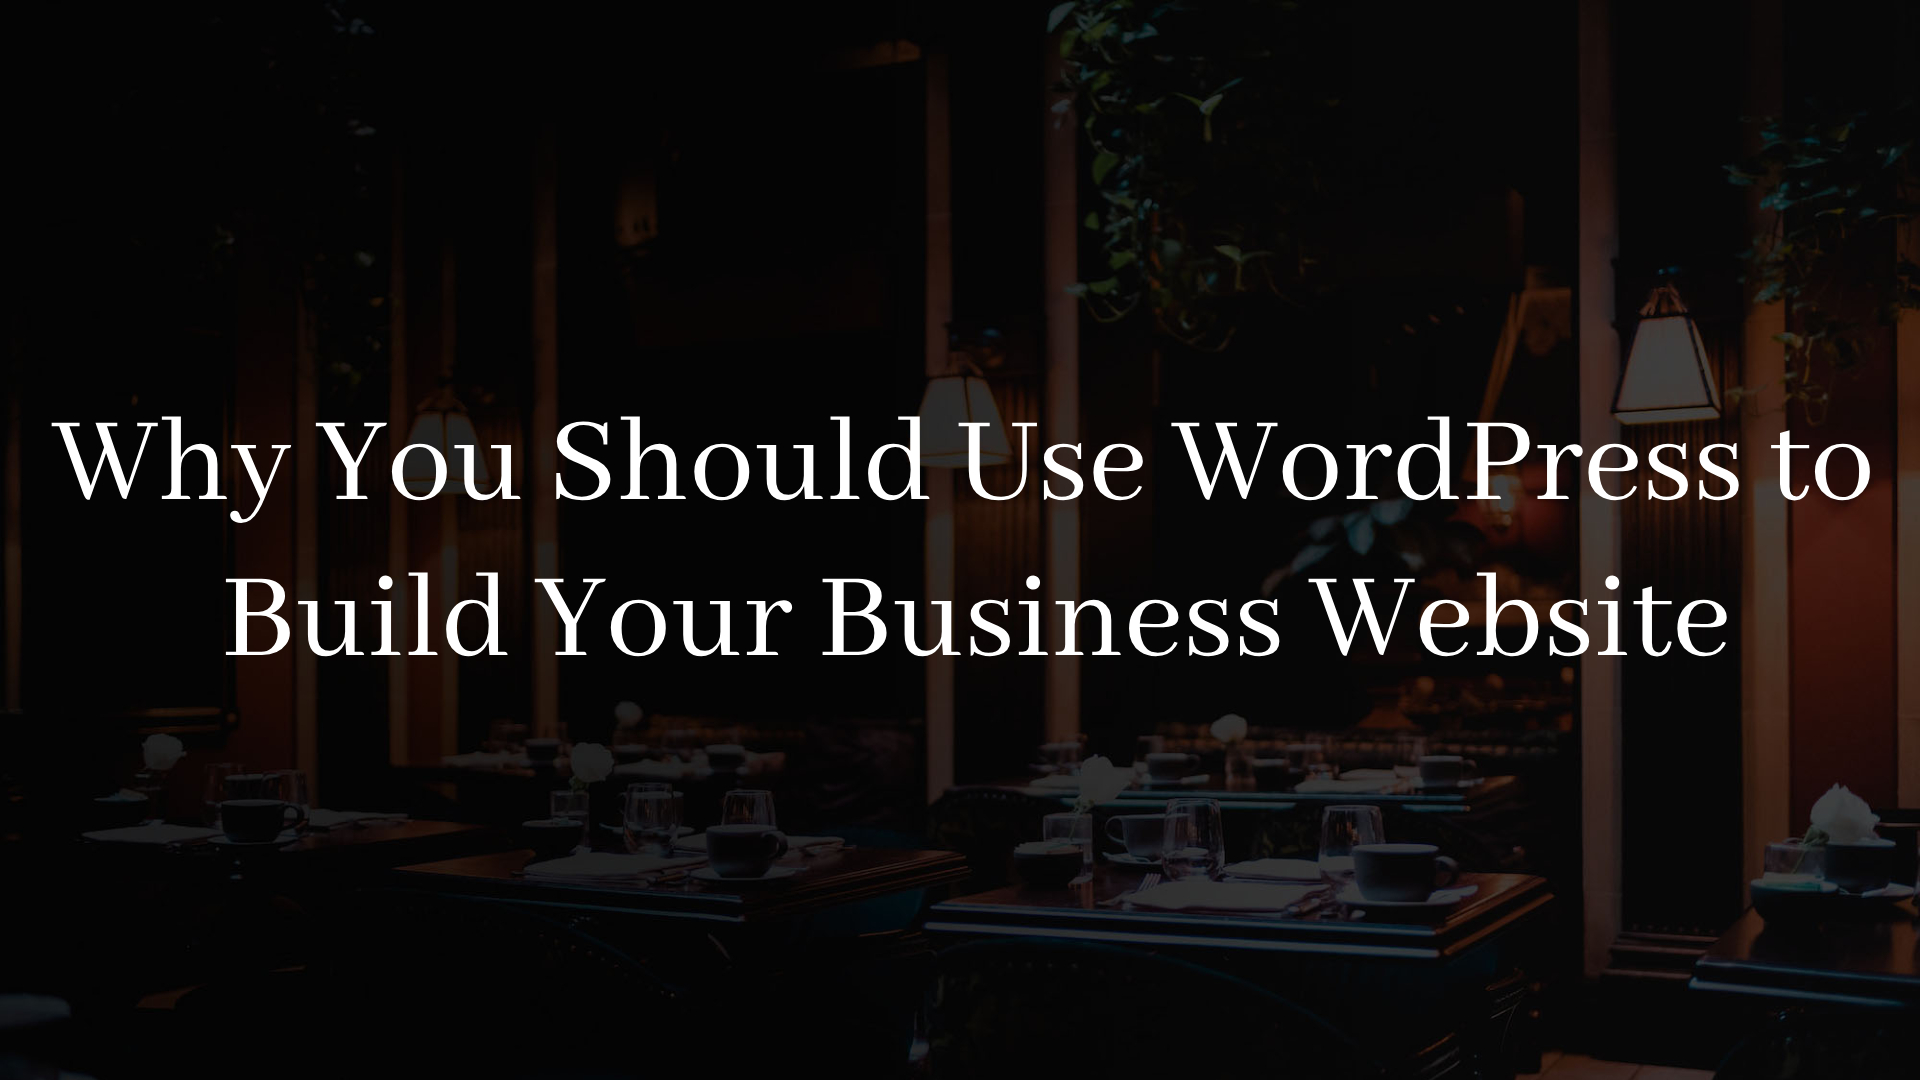 Why You Should Use WordPress to Build Your Business Website